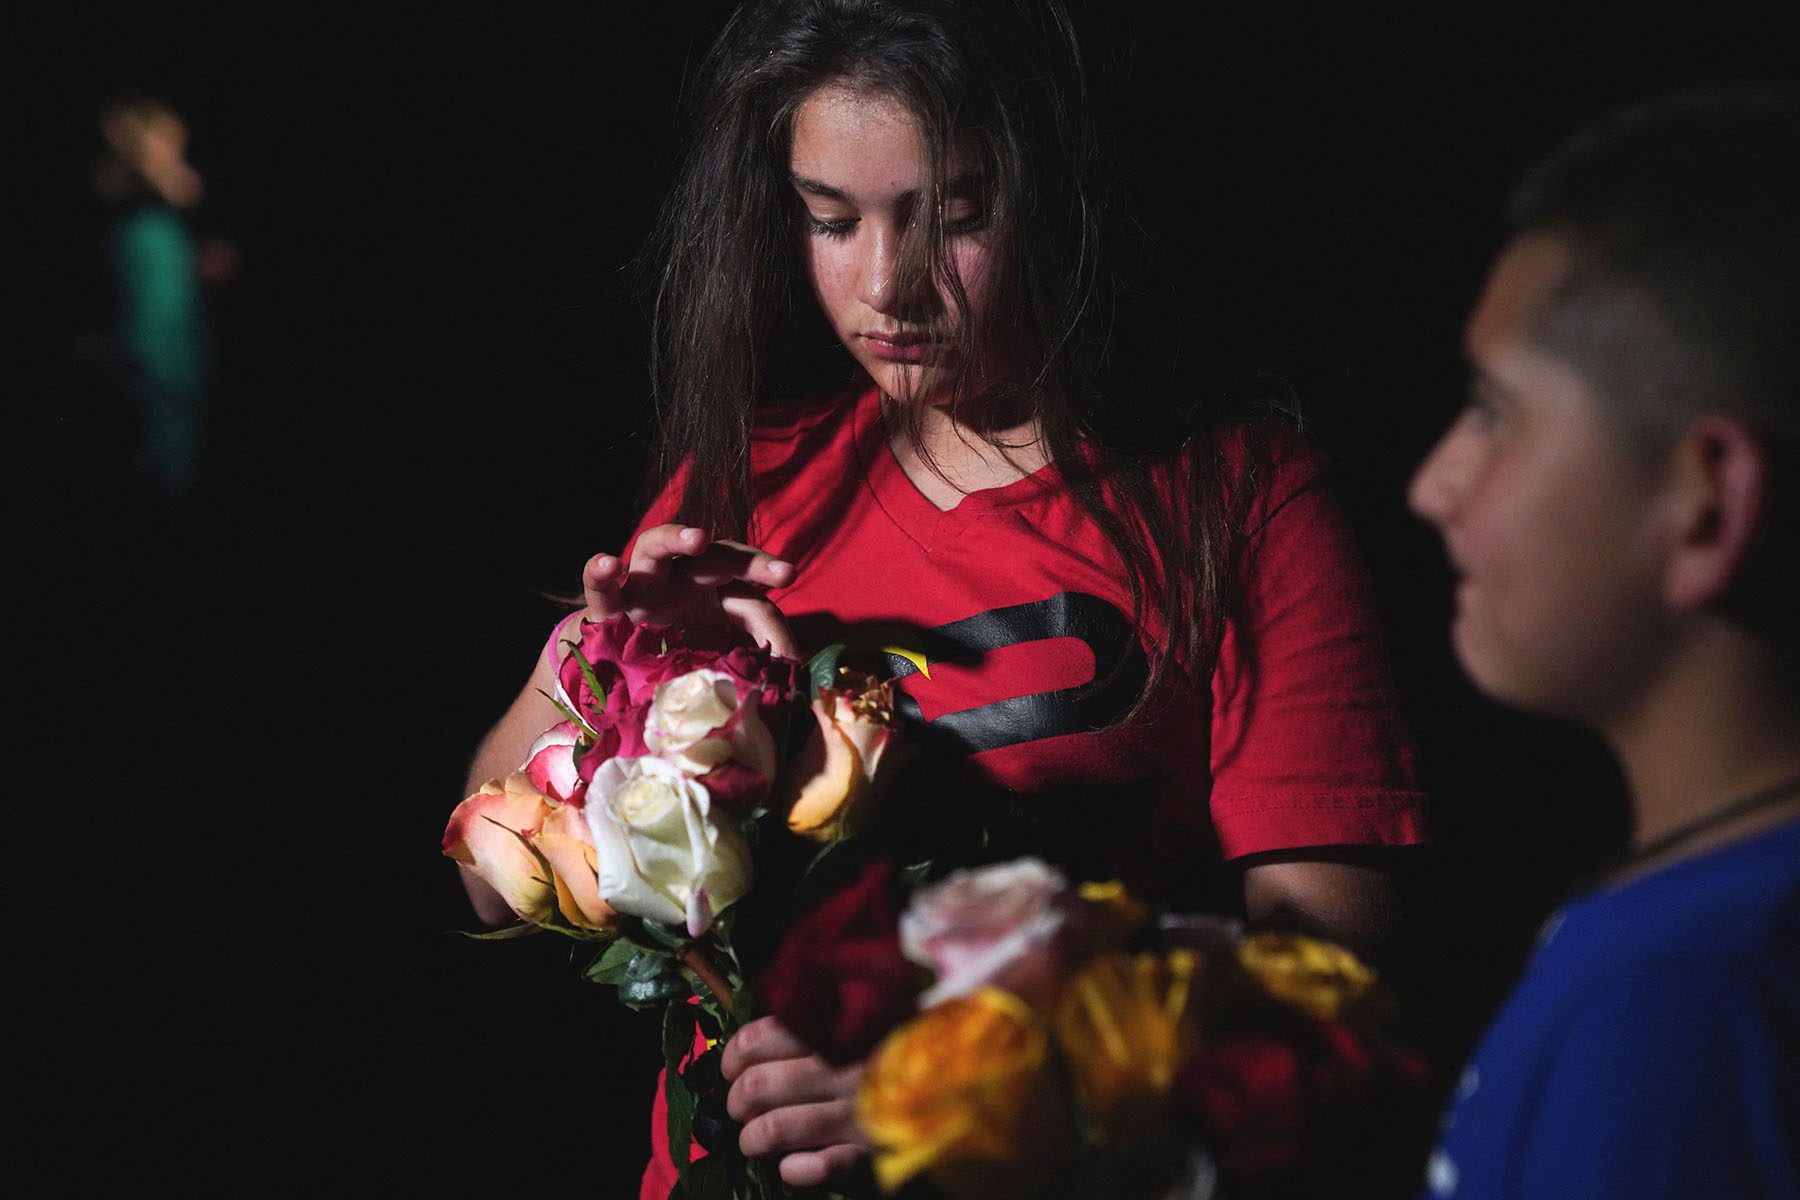 A young girl holds flowers as people gather to mourn the victims of the Uvalde shooting.